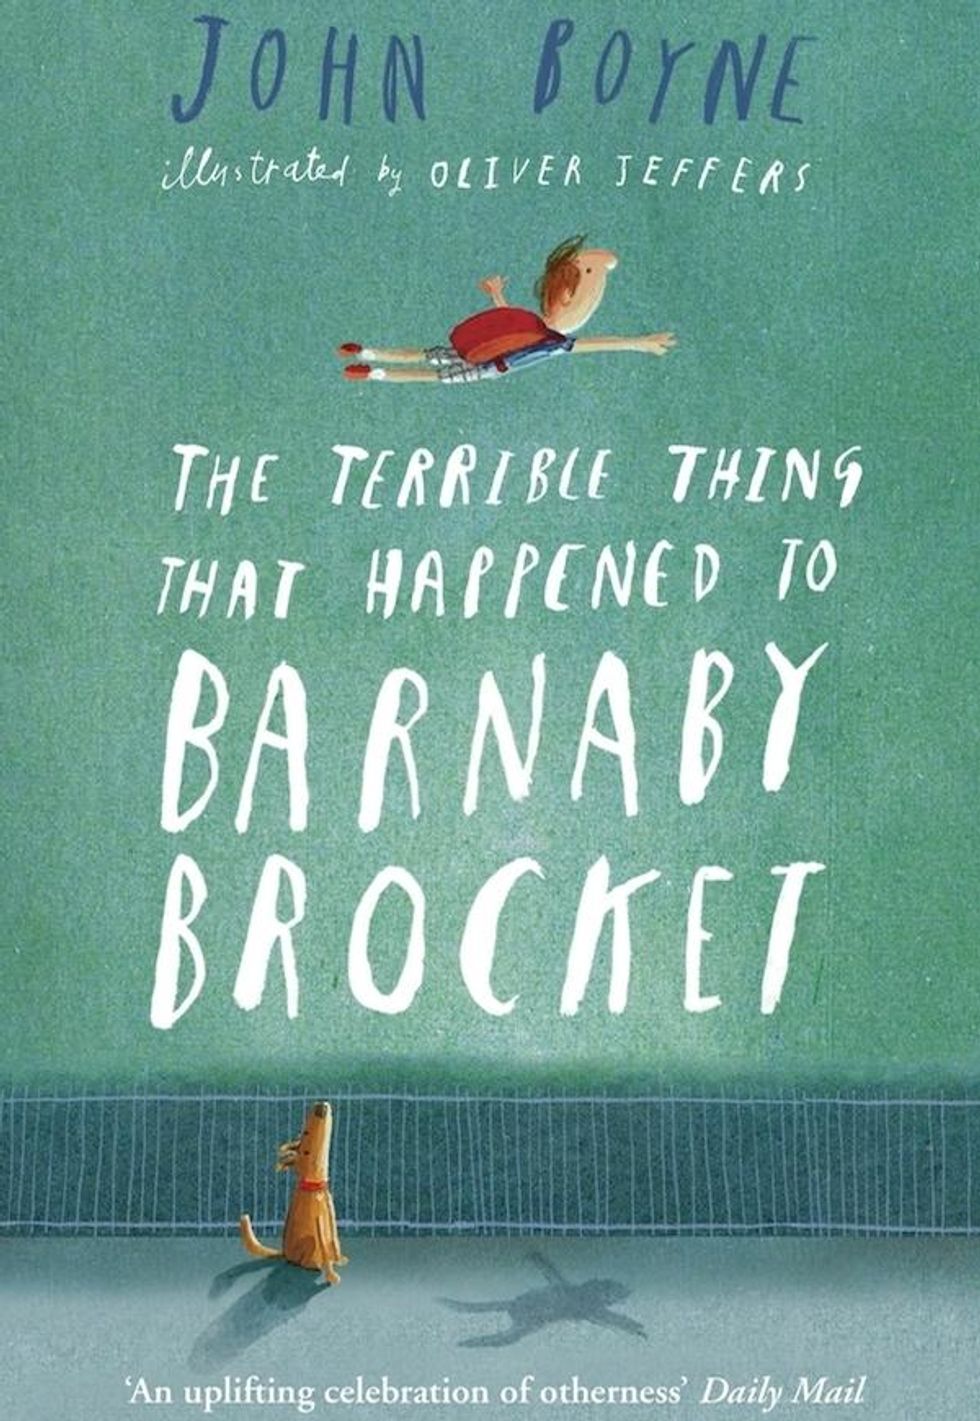 The Terrible Thing That Happened to Barnaby Brocket, by John Boyd